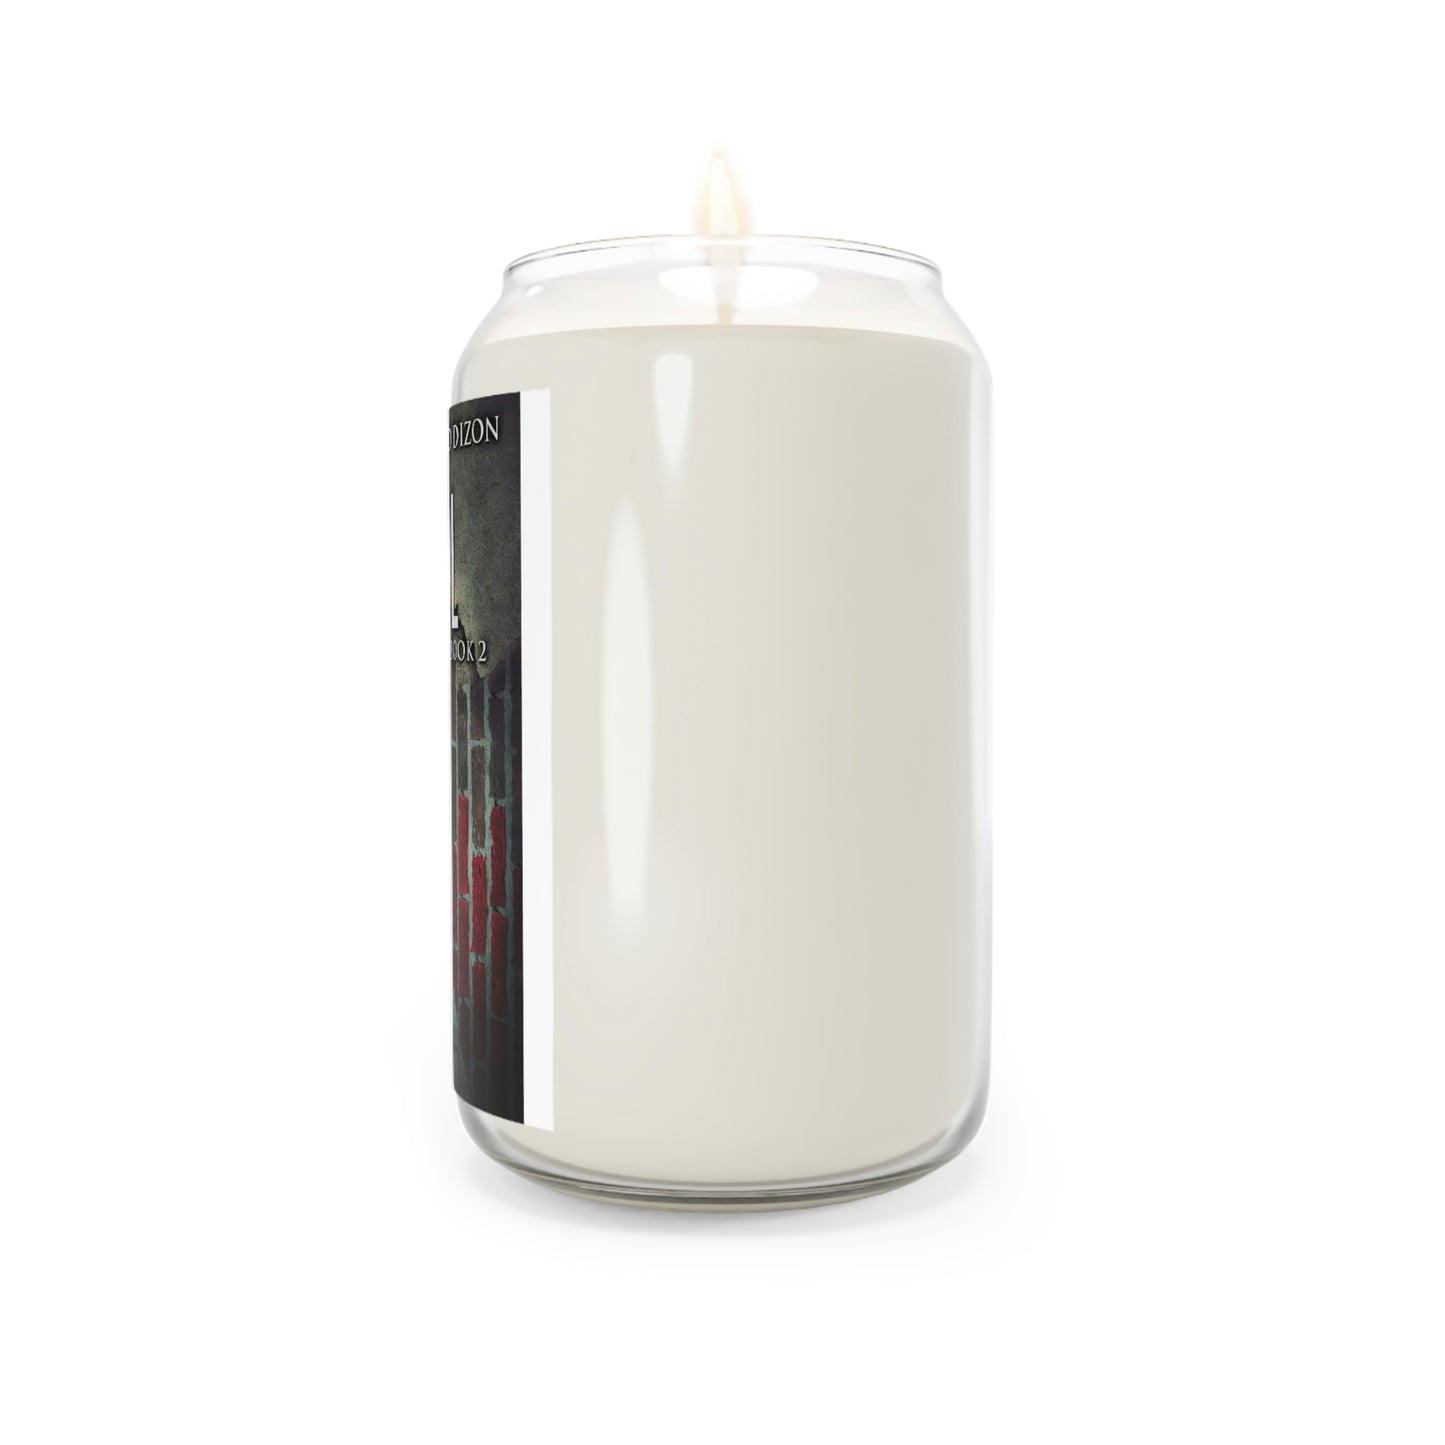 Bical - Scented Candle